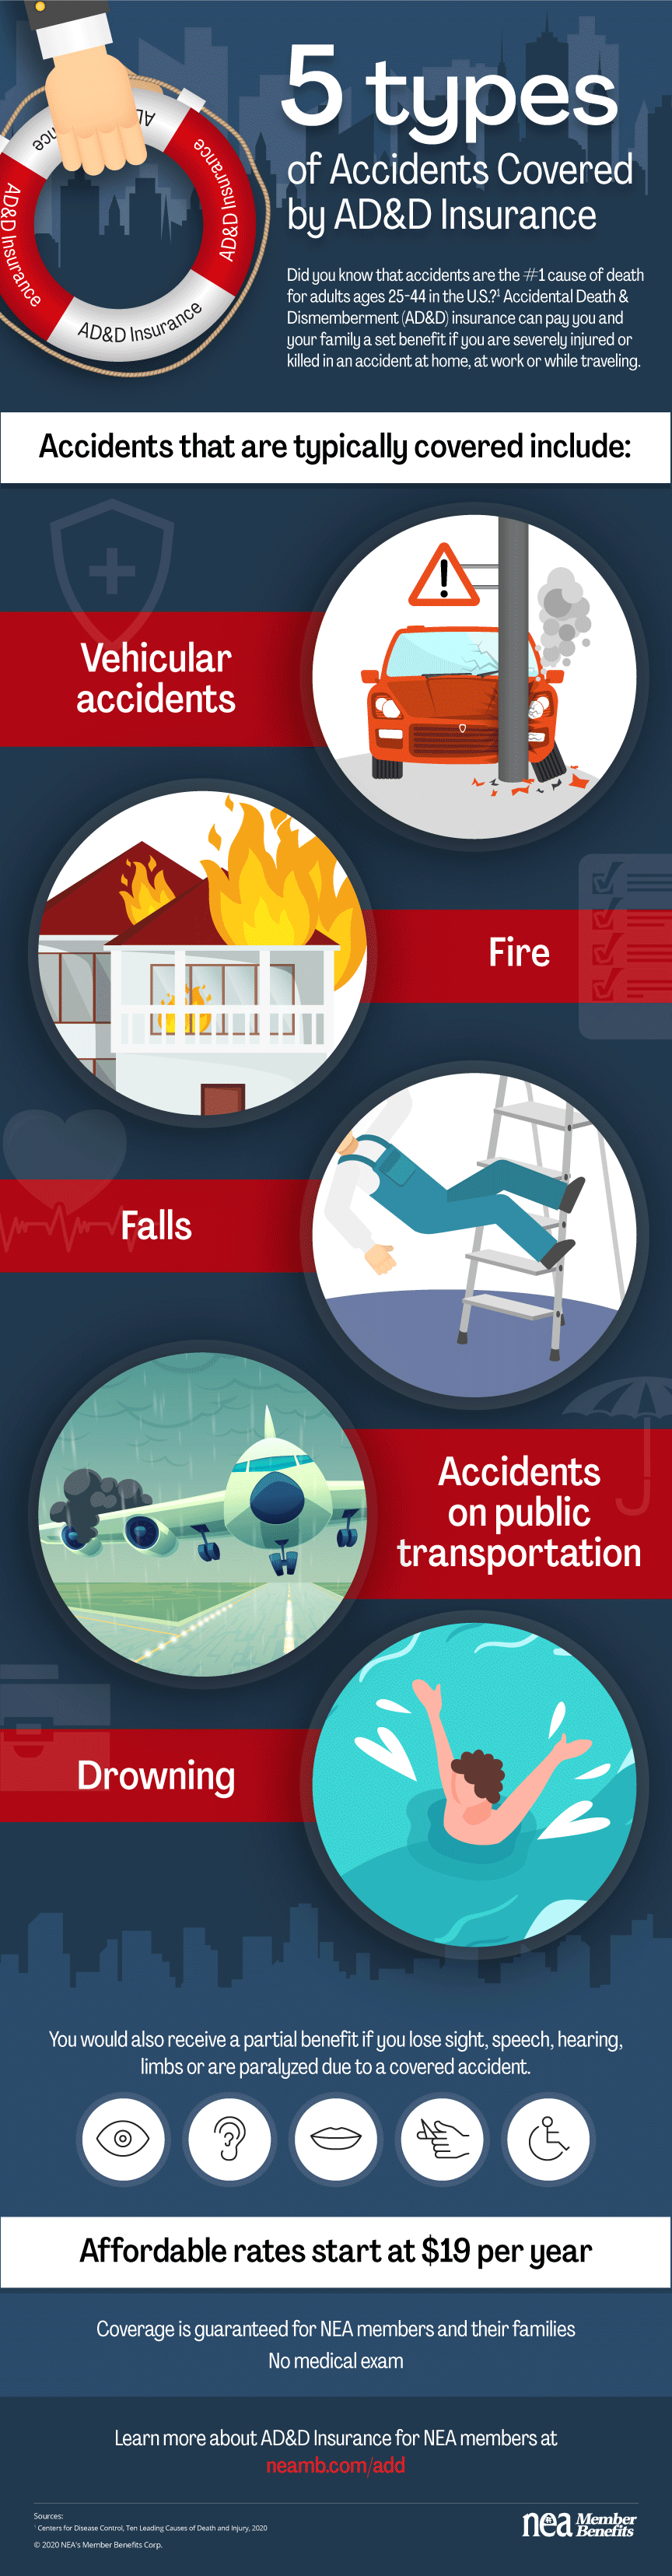 5 Types of Accidents Accidental Death and Dismemberment Insurance Covers Infographic